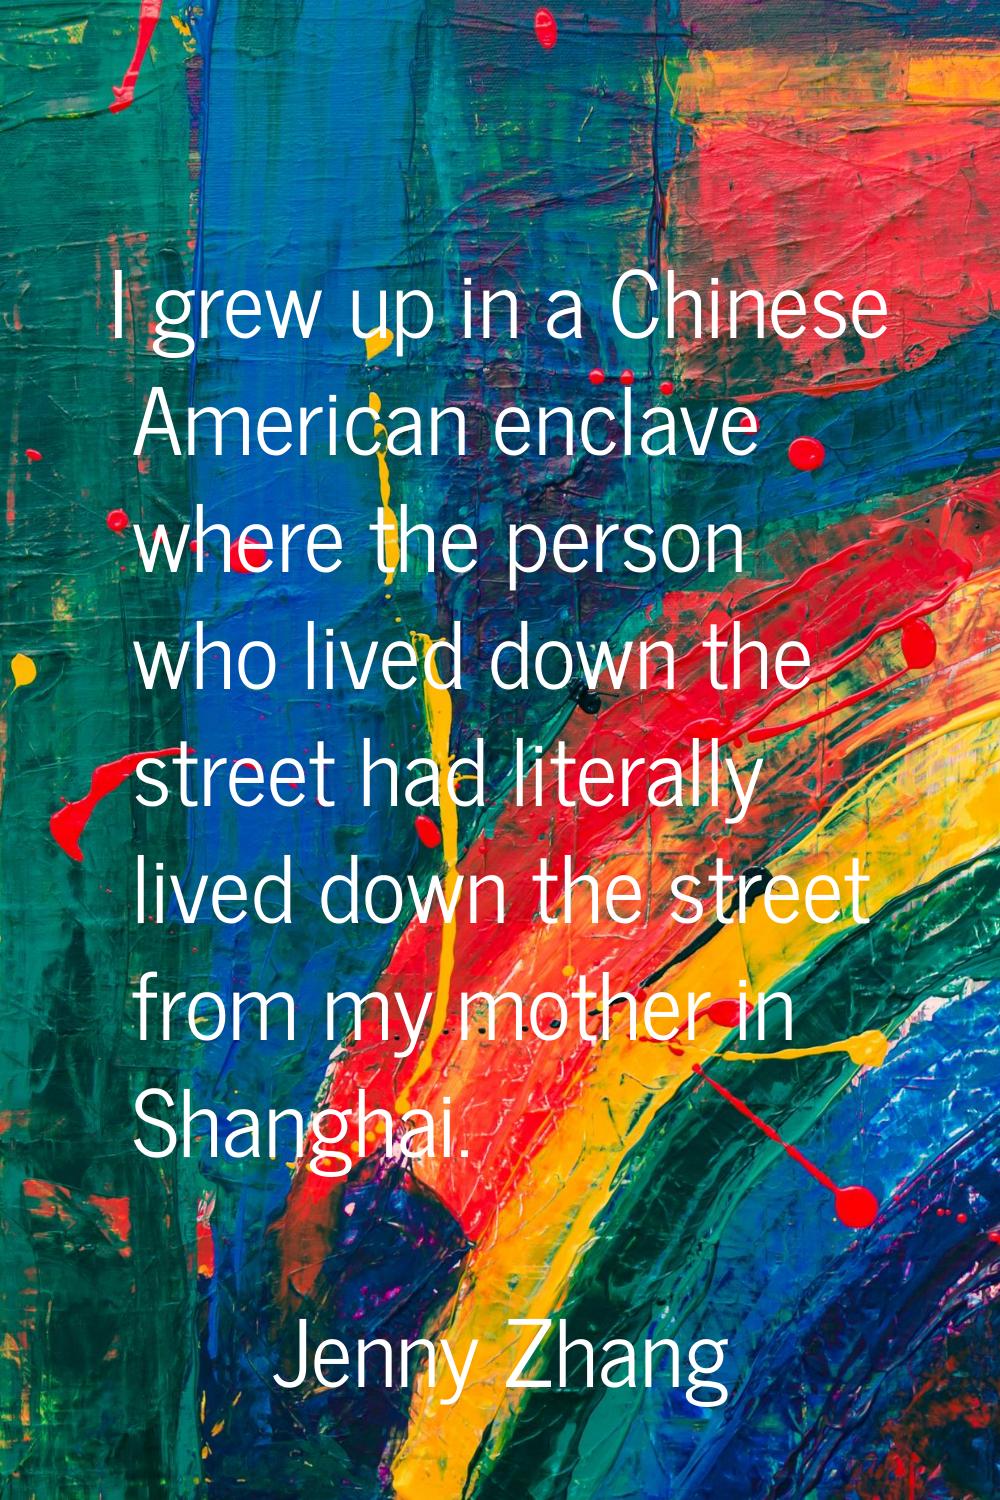 I grew up in a Chinese American enclave where the person who lived down the street had literally li